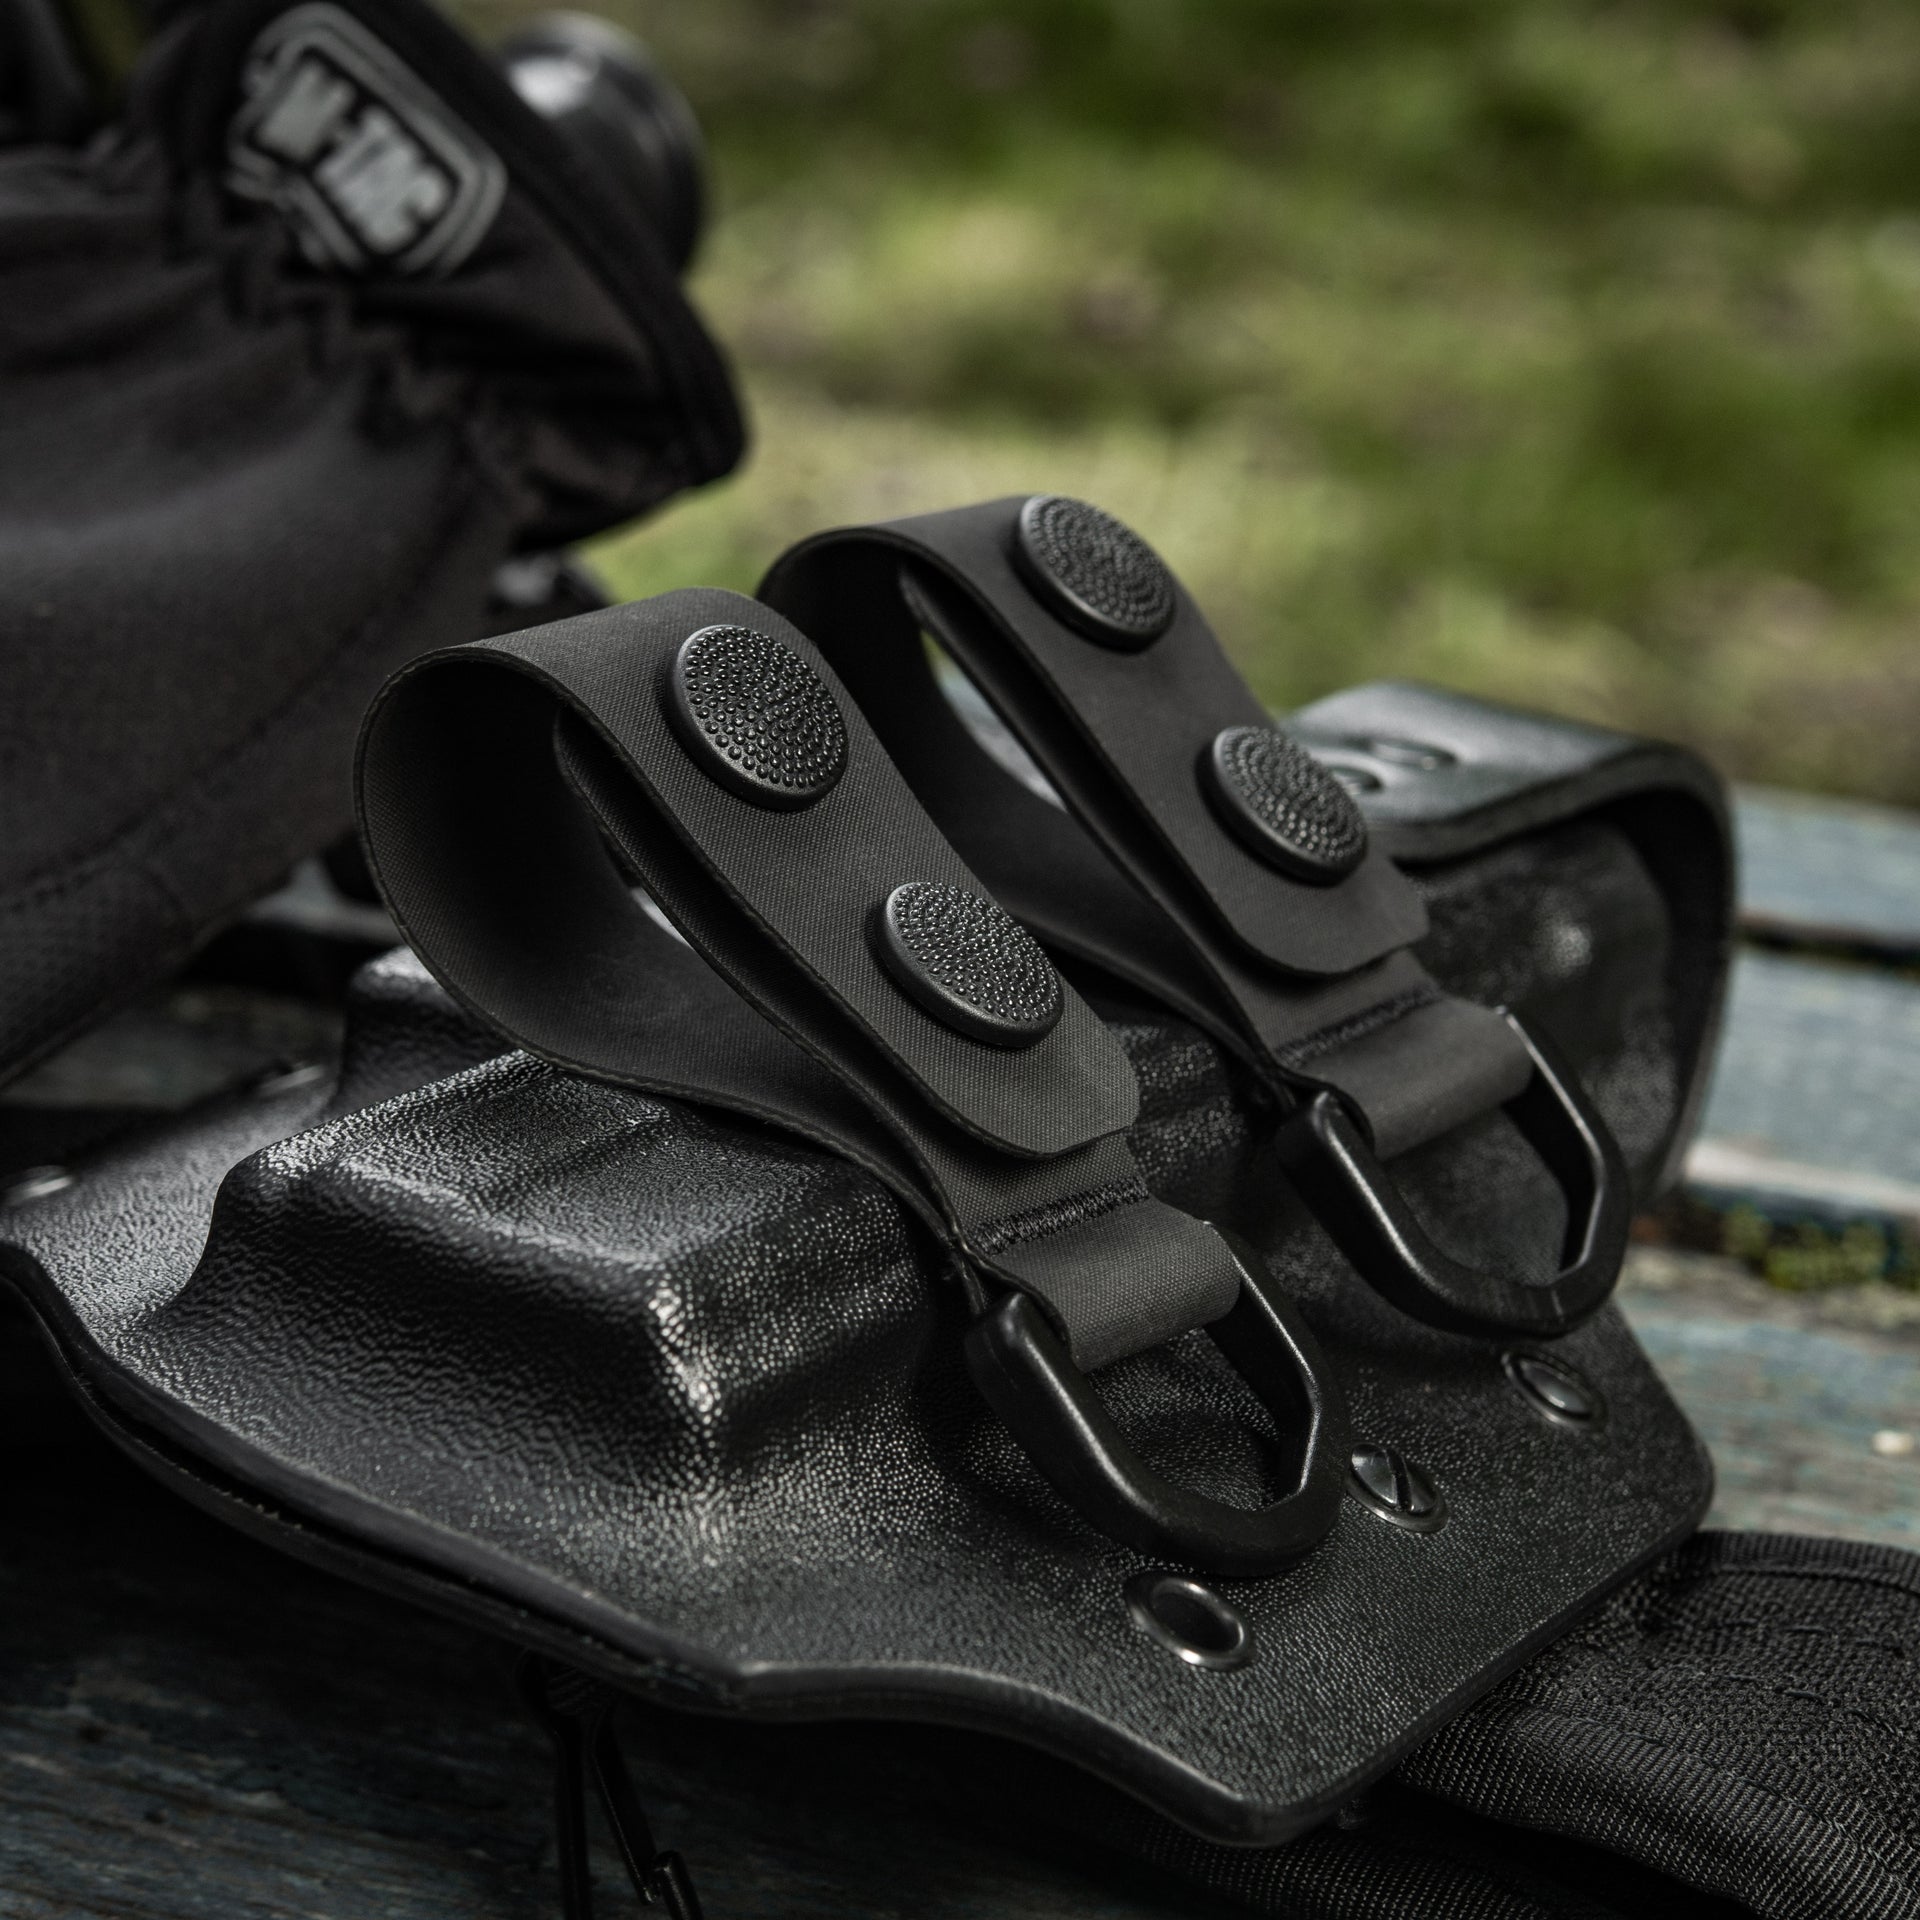 Duty Belt Equipment – The Essential Tools of Law Enforcement